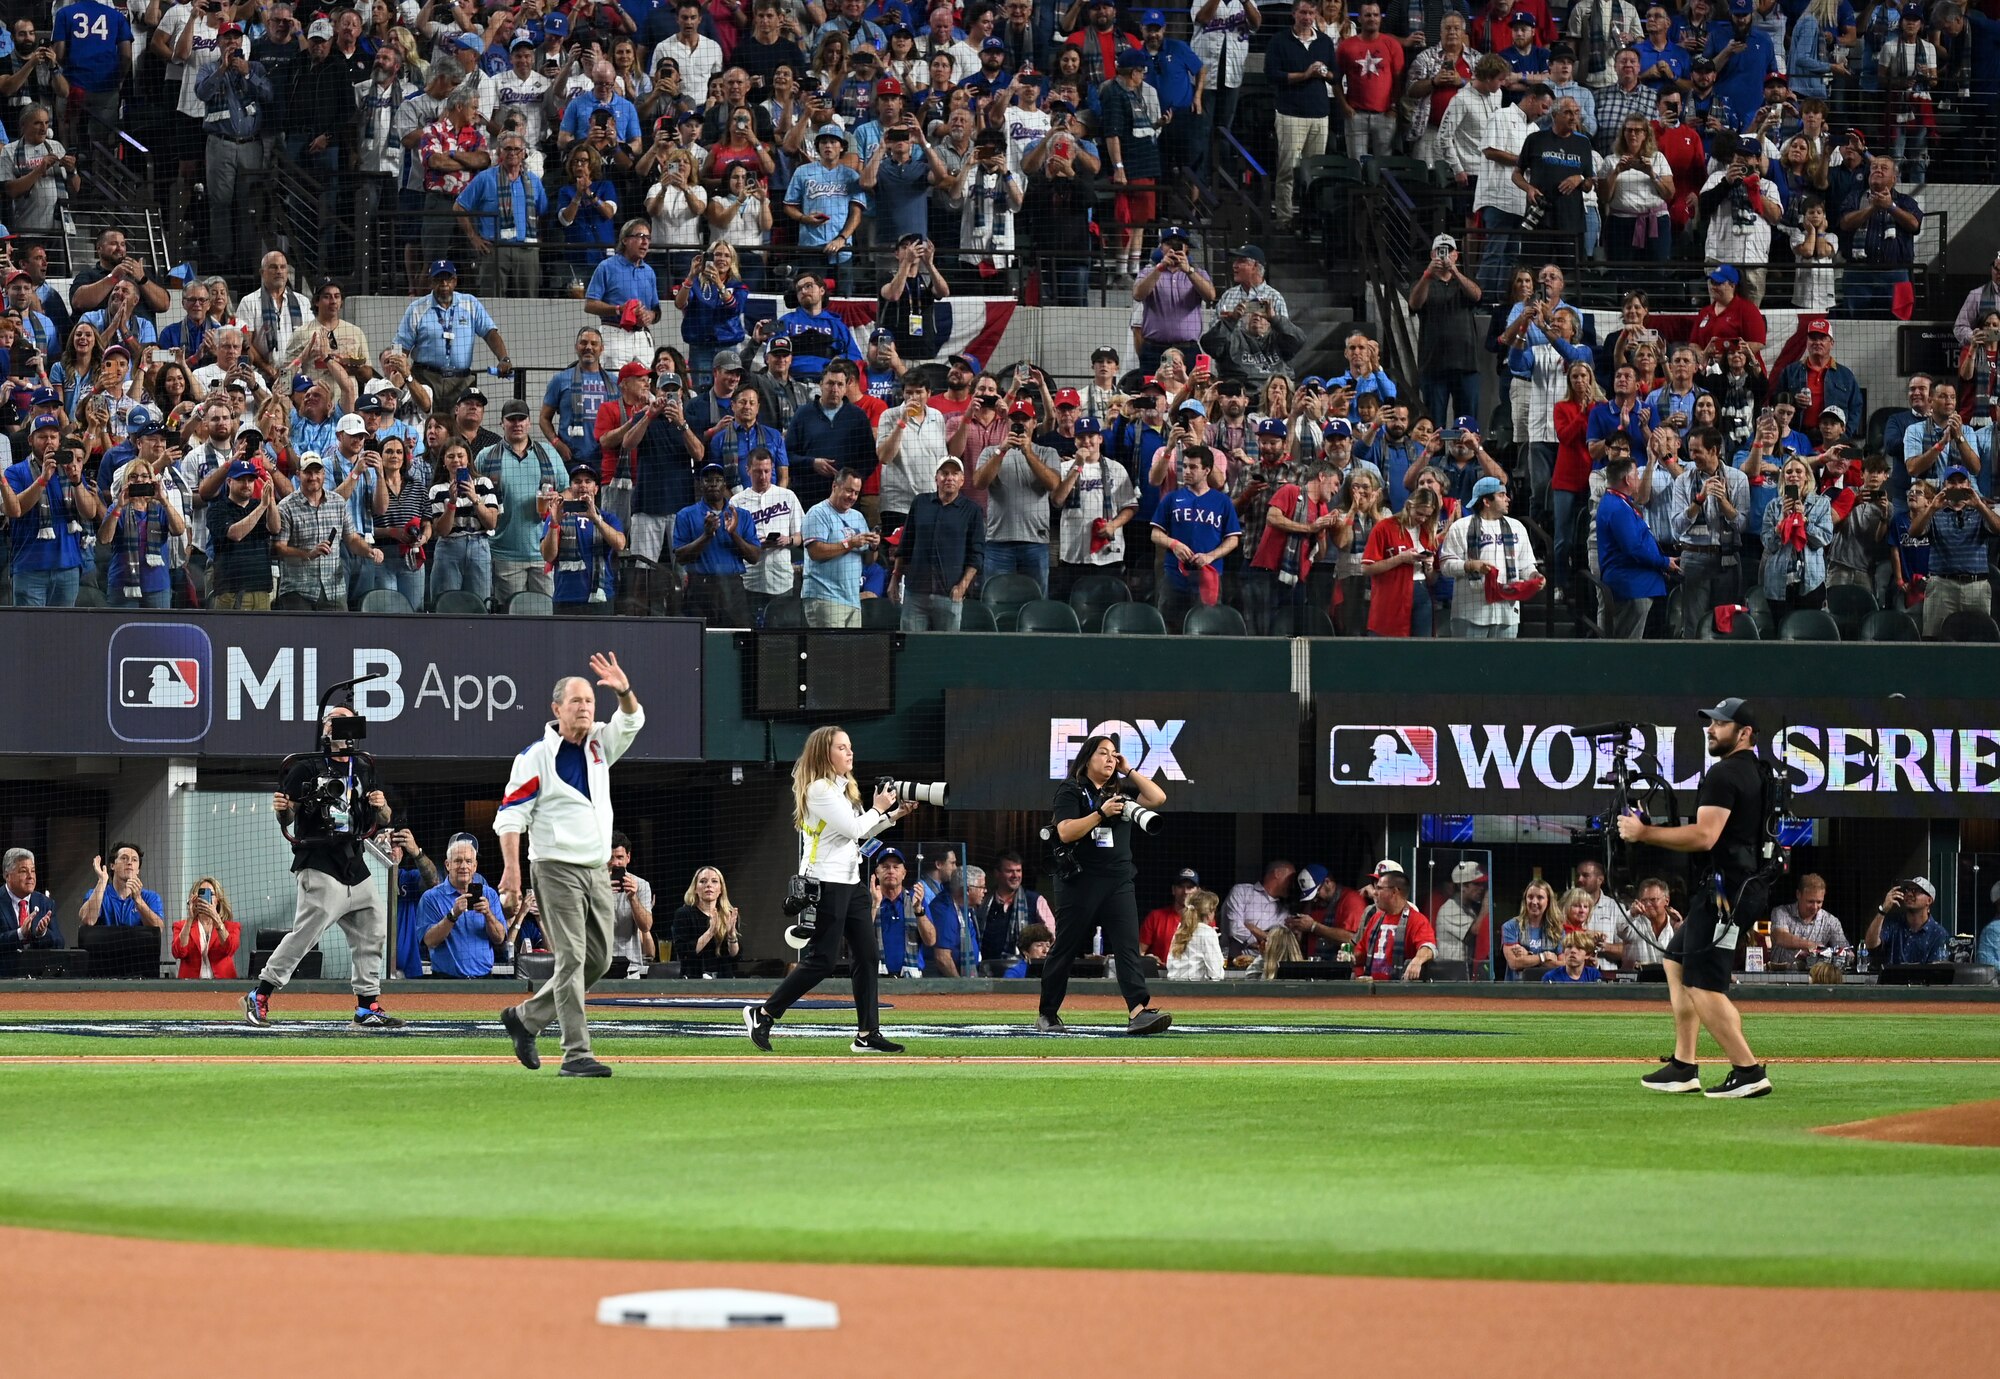 Former President George W. Bush greets the crowd during the pre-game ceremony at the World Series opening game at Globe Life Field in Arlington, Texas, Oct. 27, 2023. Bush has played a pivotal role within the Texas Rangers franchise including being a partial owner for more than 10 years and participating in pre-game festivities. (U.S. Air Force photo by Staff Sgt. Holly Cook)